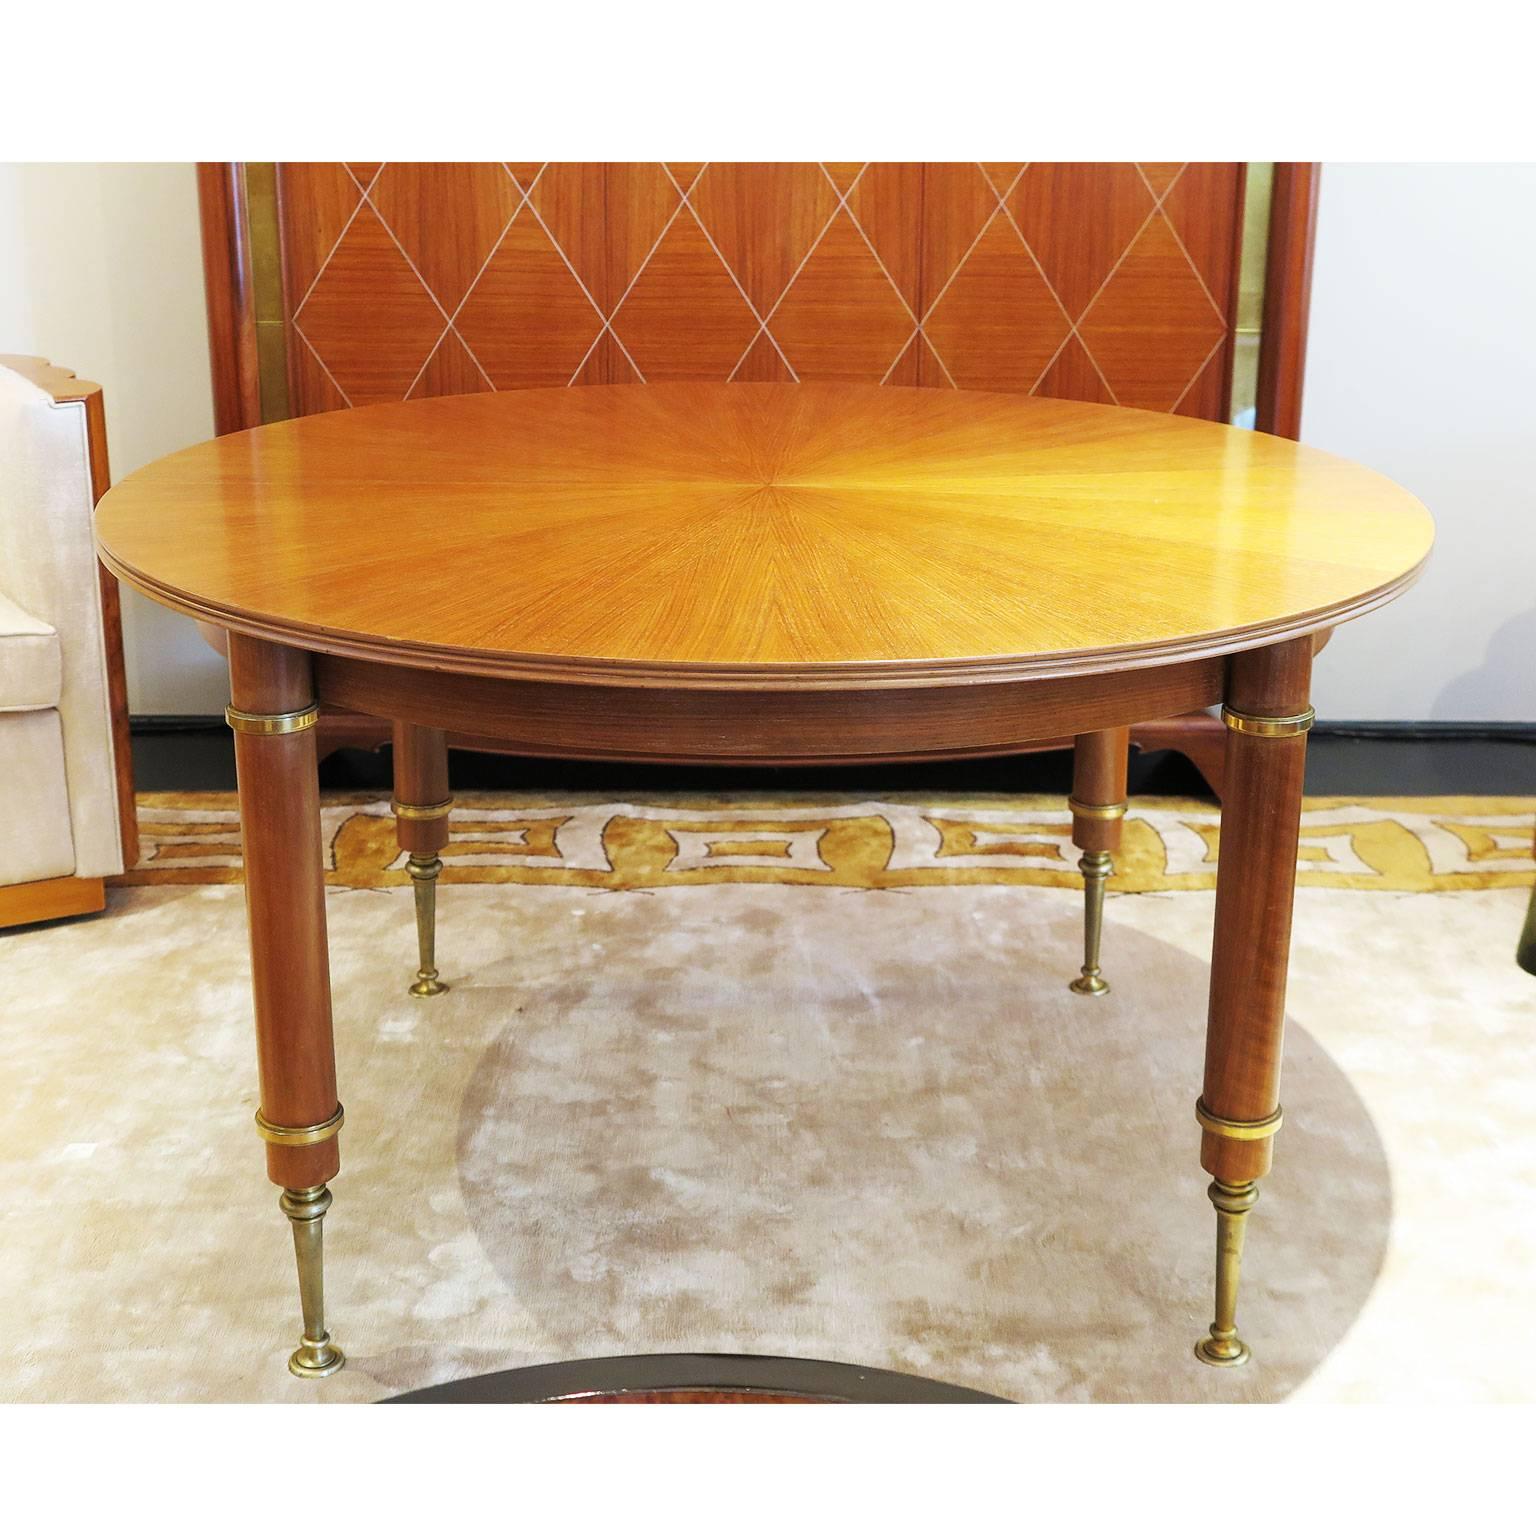 Signed by Jules Leleu and stamped Leleu, Paris, Made in France and numbered 31235. Dining or kitchen table in blond mahogany veneer top with starburst design and blond mahogany wood apron and legs. Brass cylinder legs and upper and lower legs